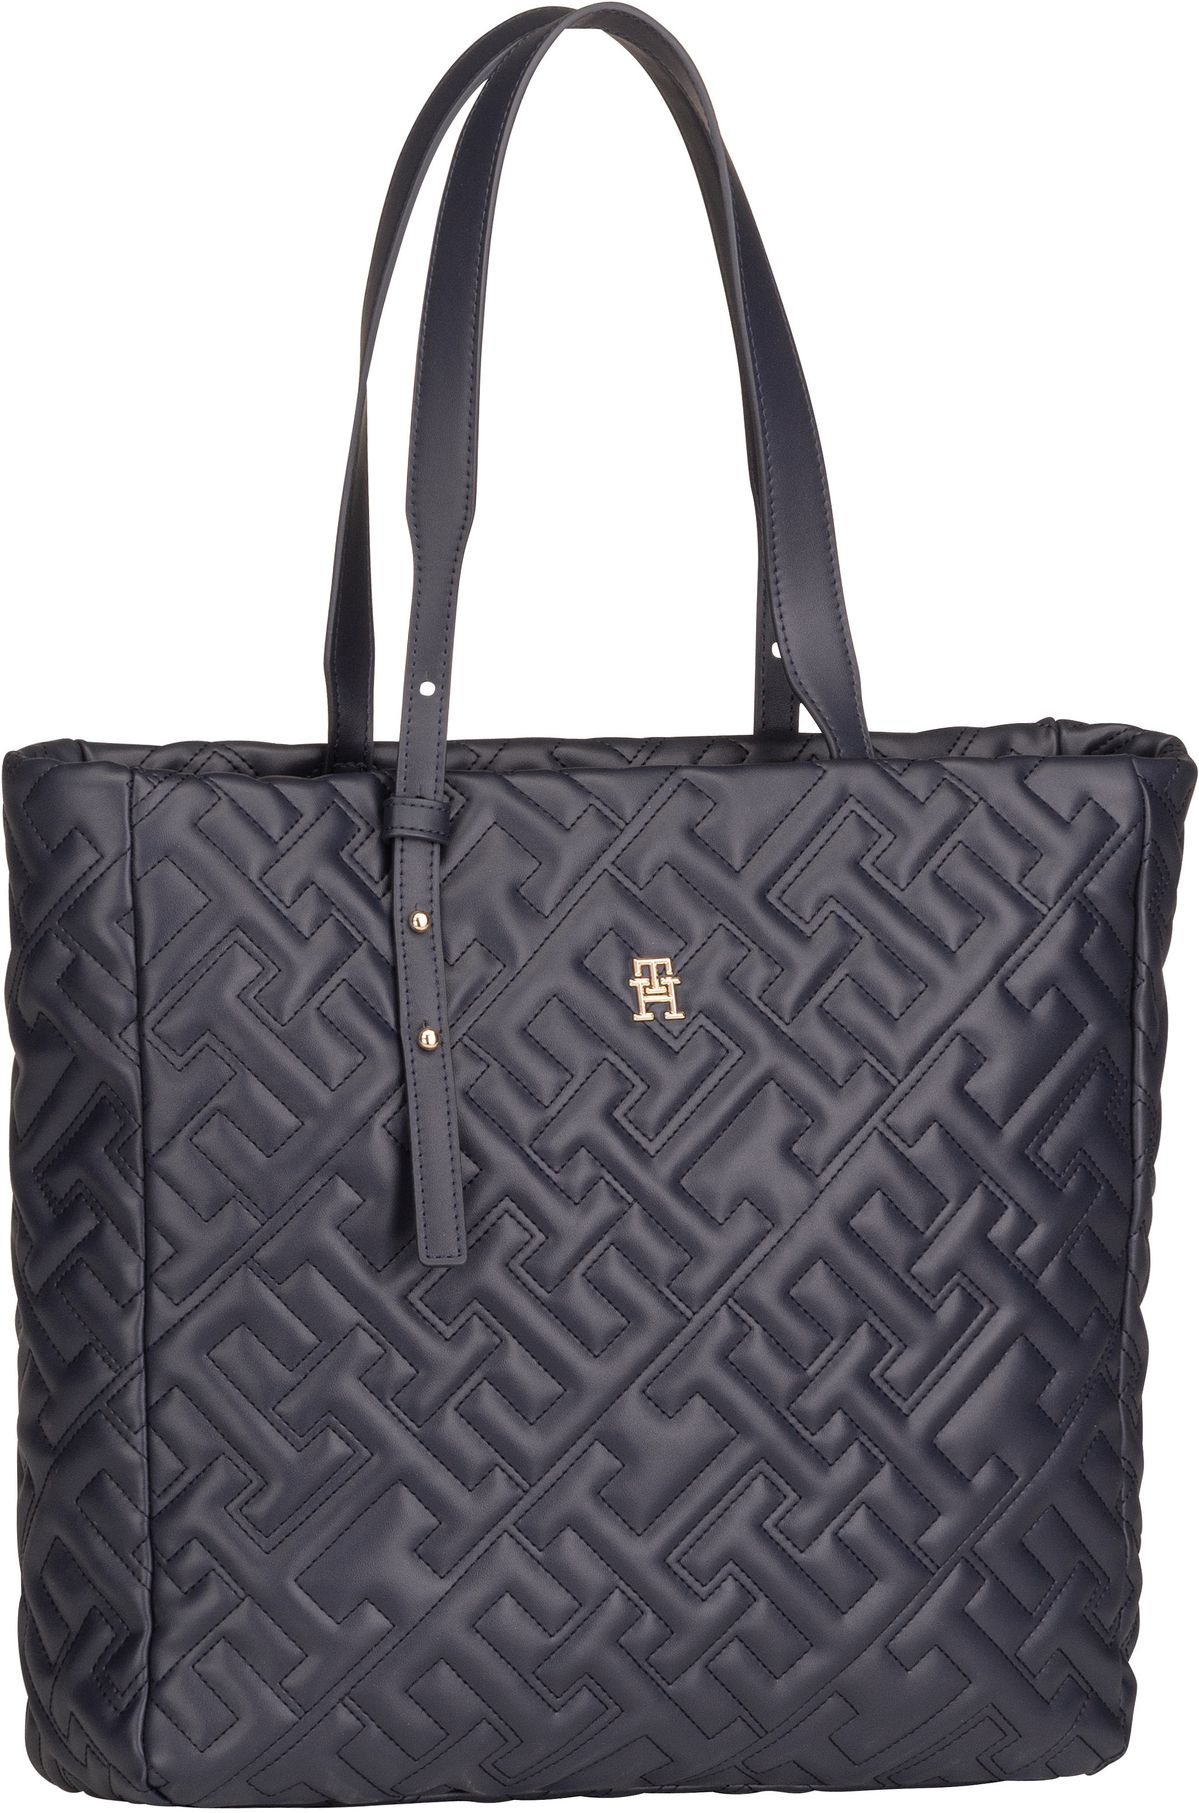 Tommy Hilfiger Tommy Hilfiger TH Soft Tote Mono FA23 in Navy (17.7 Liter), Shopper